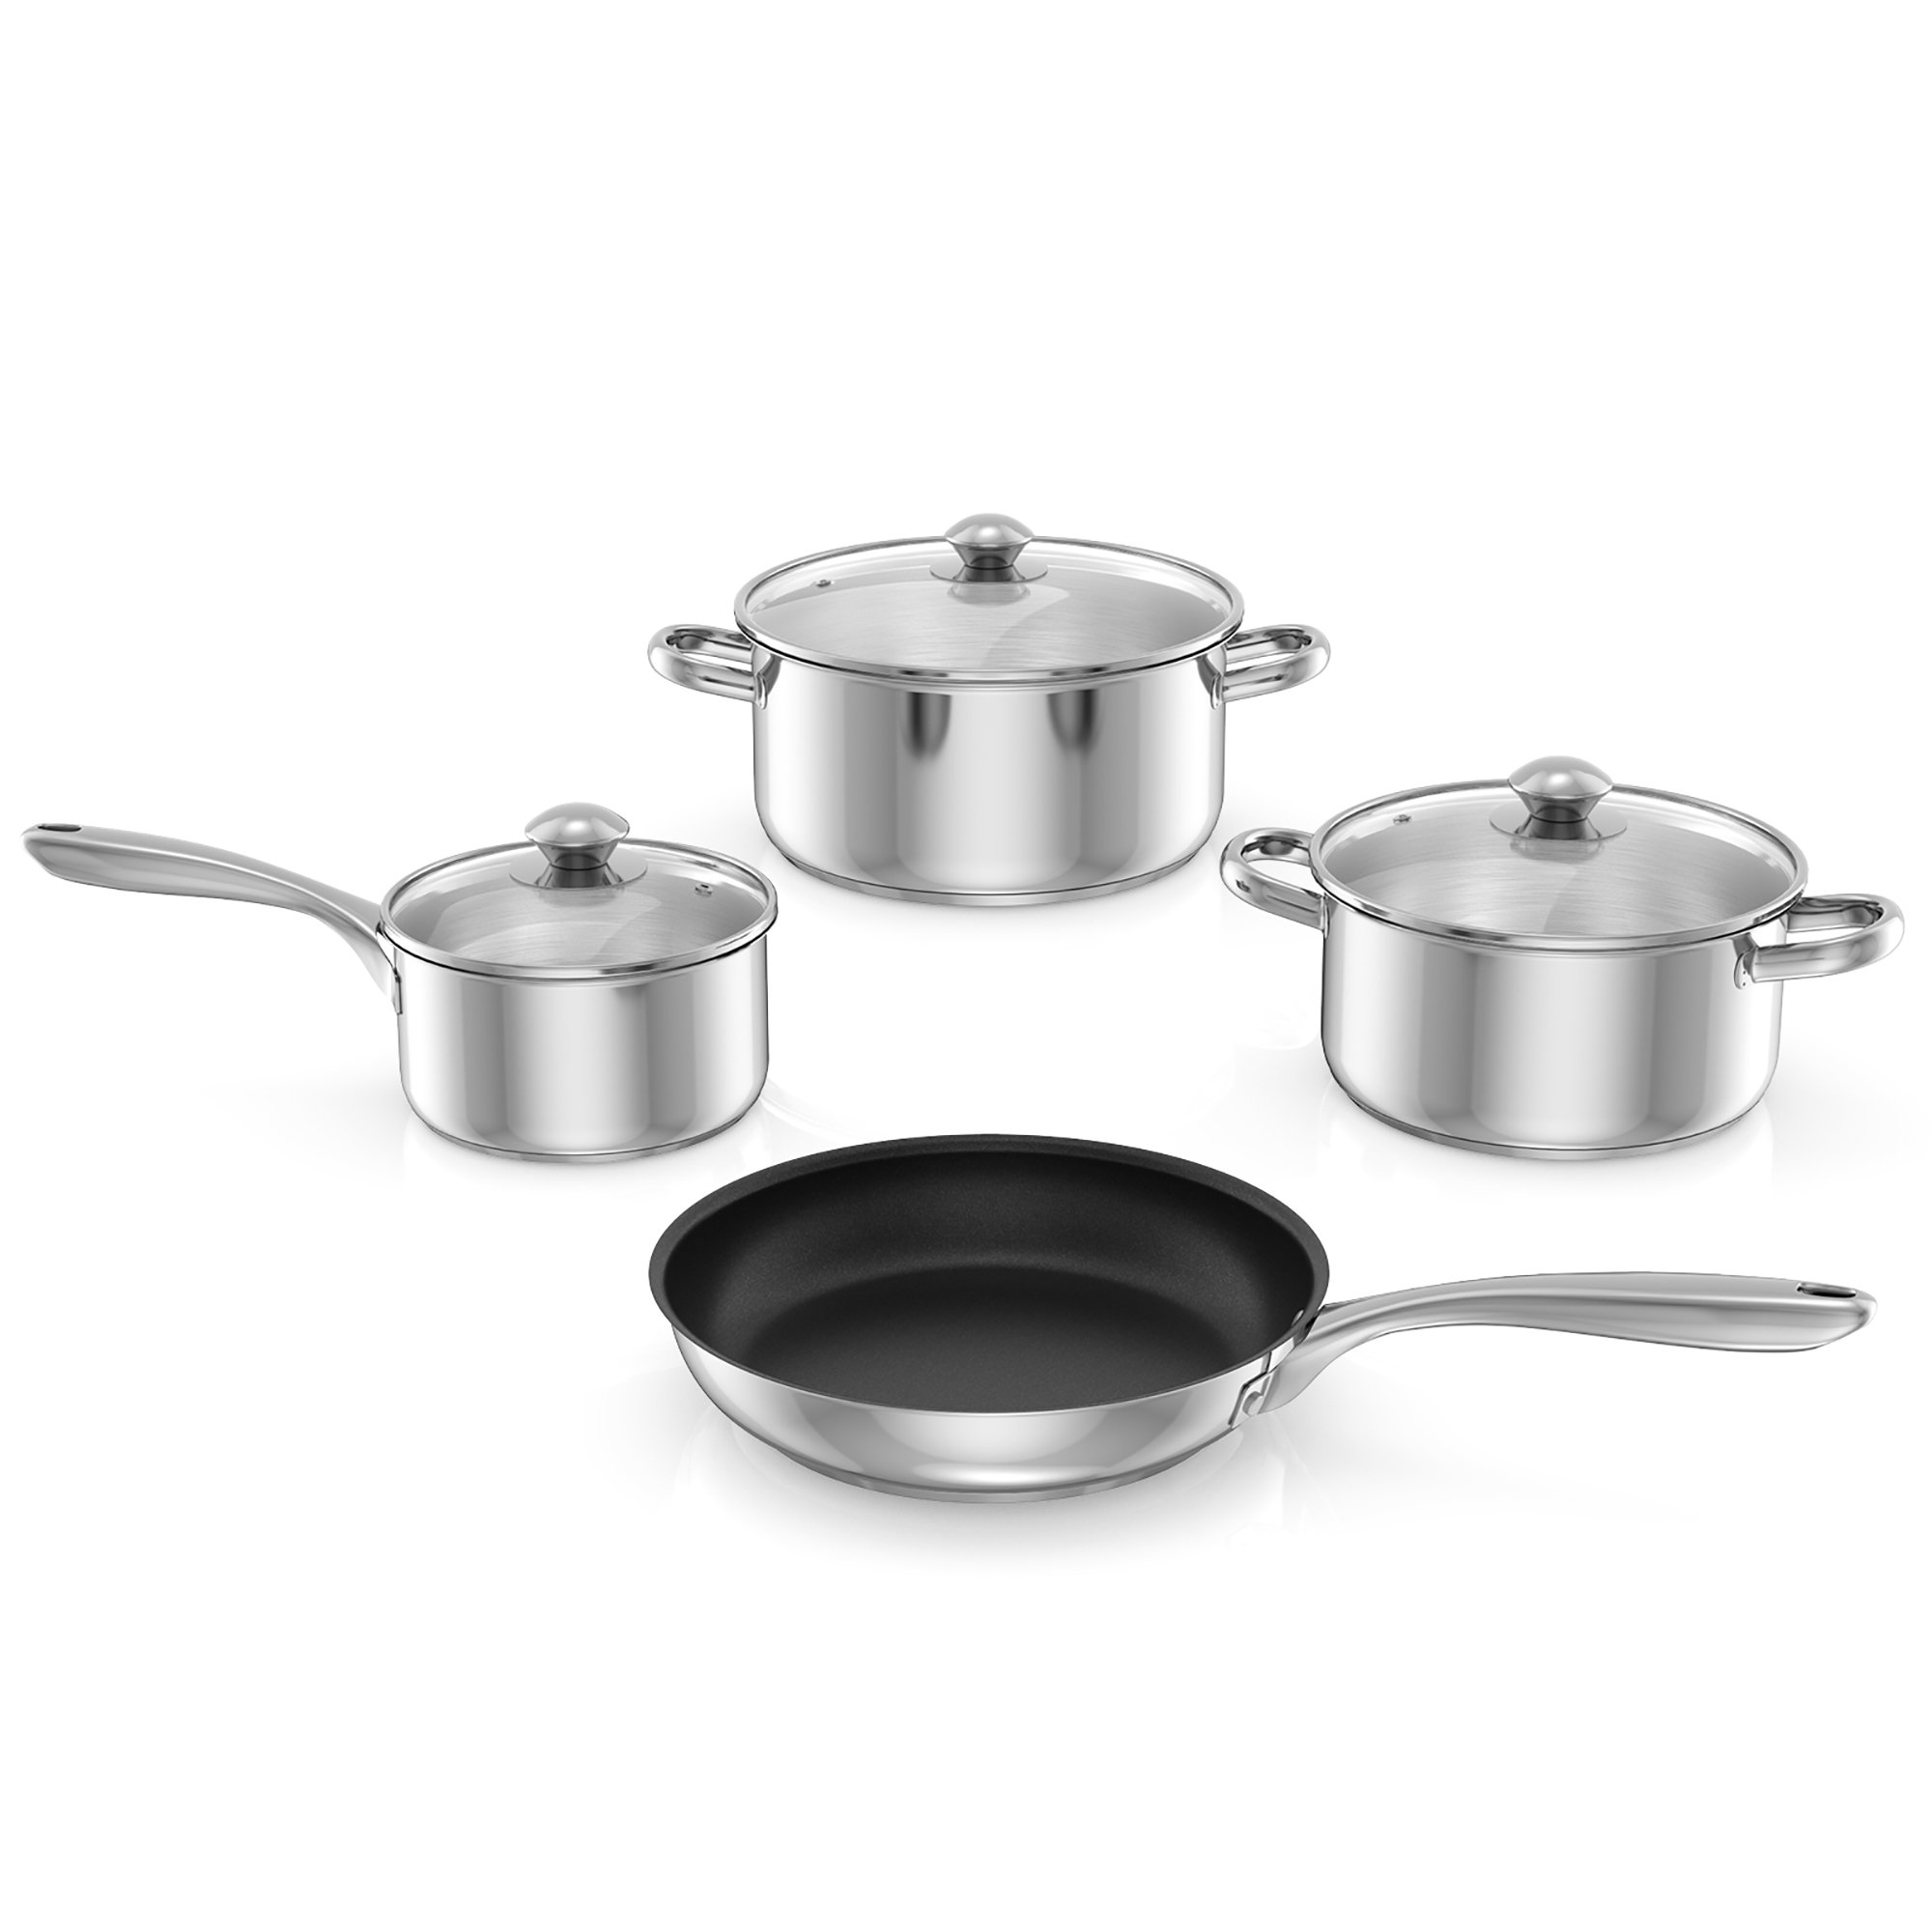 Stainless Steel Pots and Pans Set, 7-Piece Kitchen Cookware Sets with Glass  Lids, Stay-Cool Handle, Oven Safe, Works with Induction/Electric and Gas